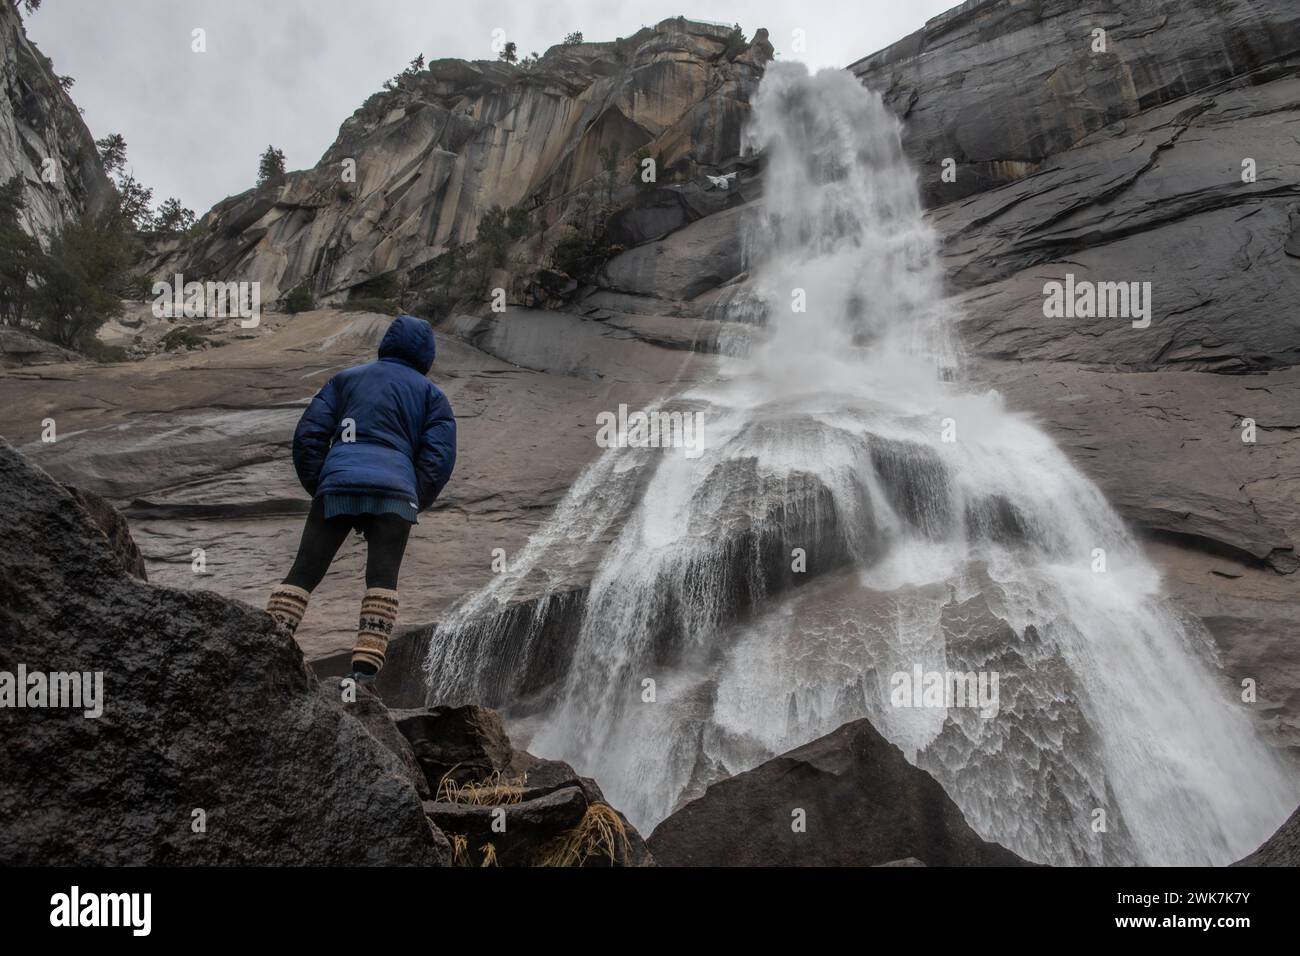 A female hiker stands underneath a cascading waterfall in Yosemite National Park in the Sierra Nevada Mountains of California, USA. Stock Photo